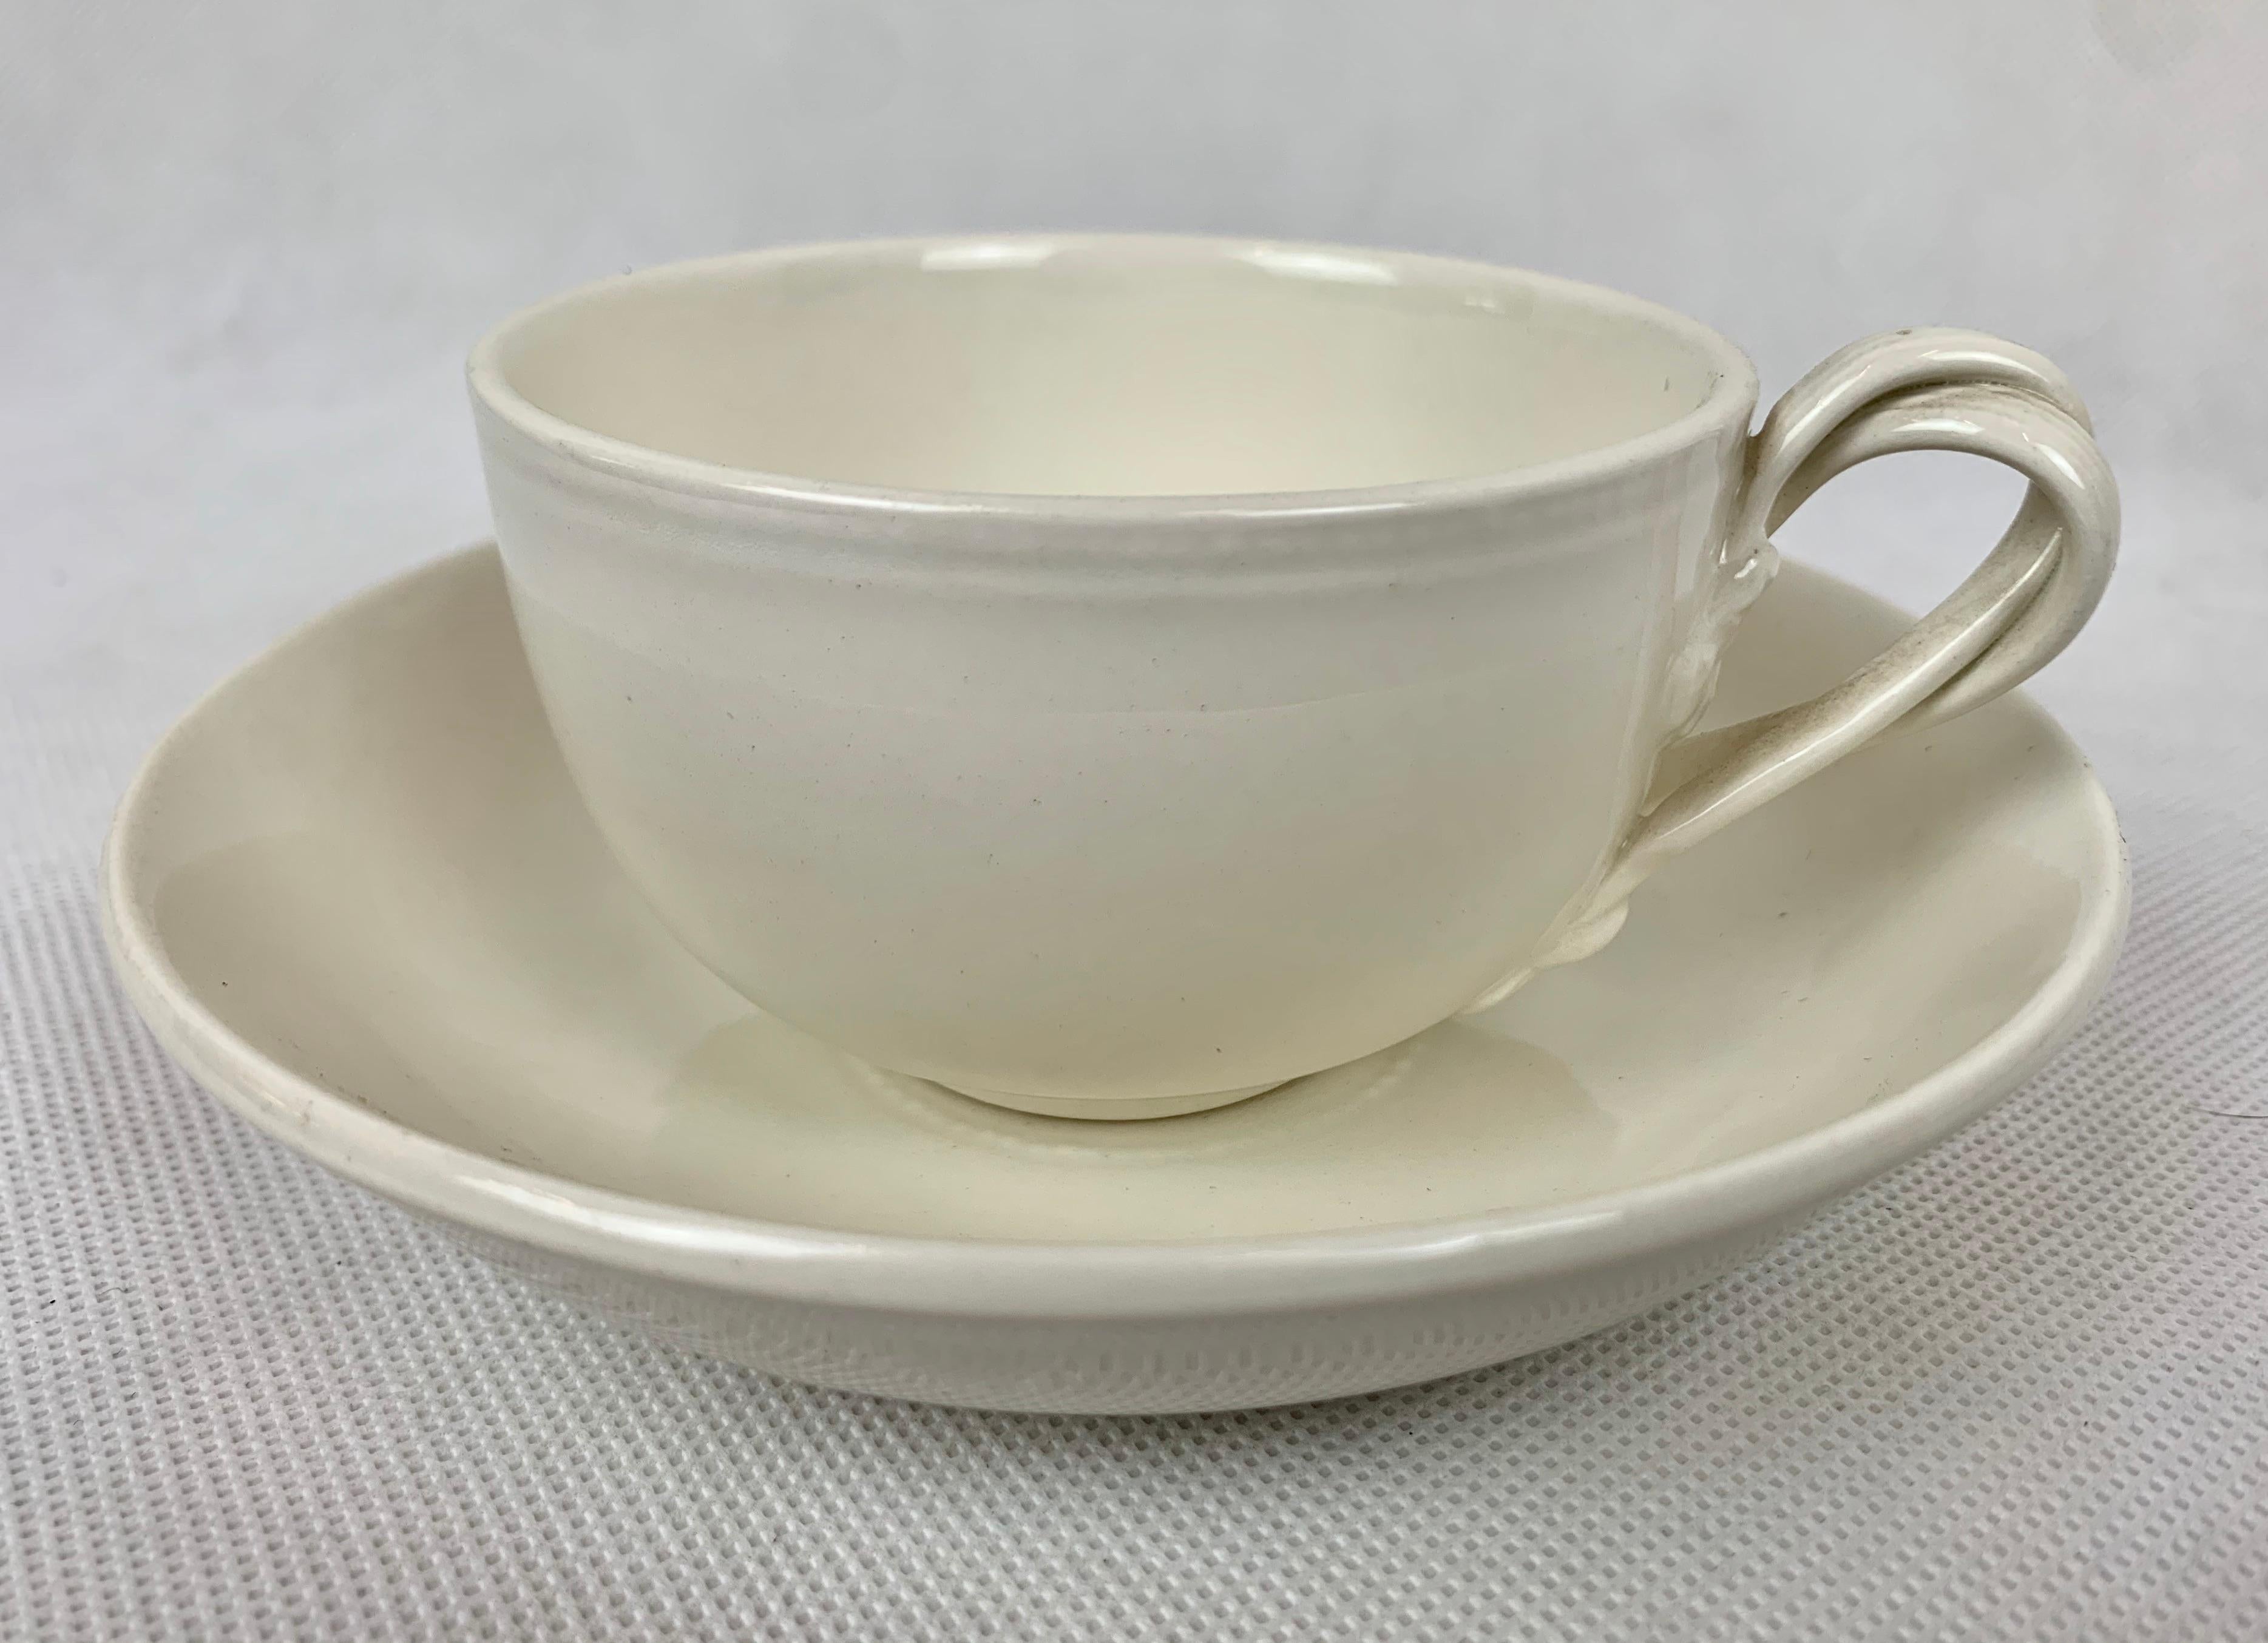 Set of six cups and saucers made by the Authentic Leedsware Company, England. They have the double strap applied handles and a deep saucer for cooling and drinking tea. I purchased these along with other cream ware pieces directly from the company